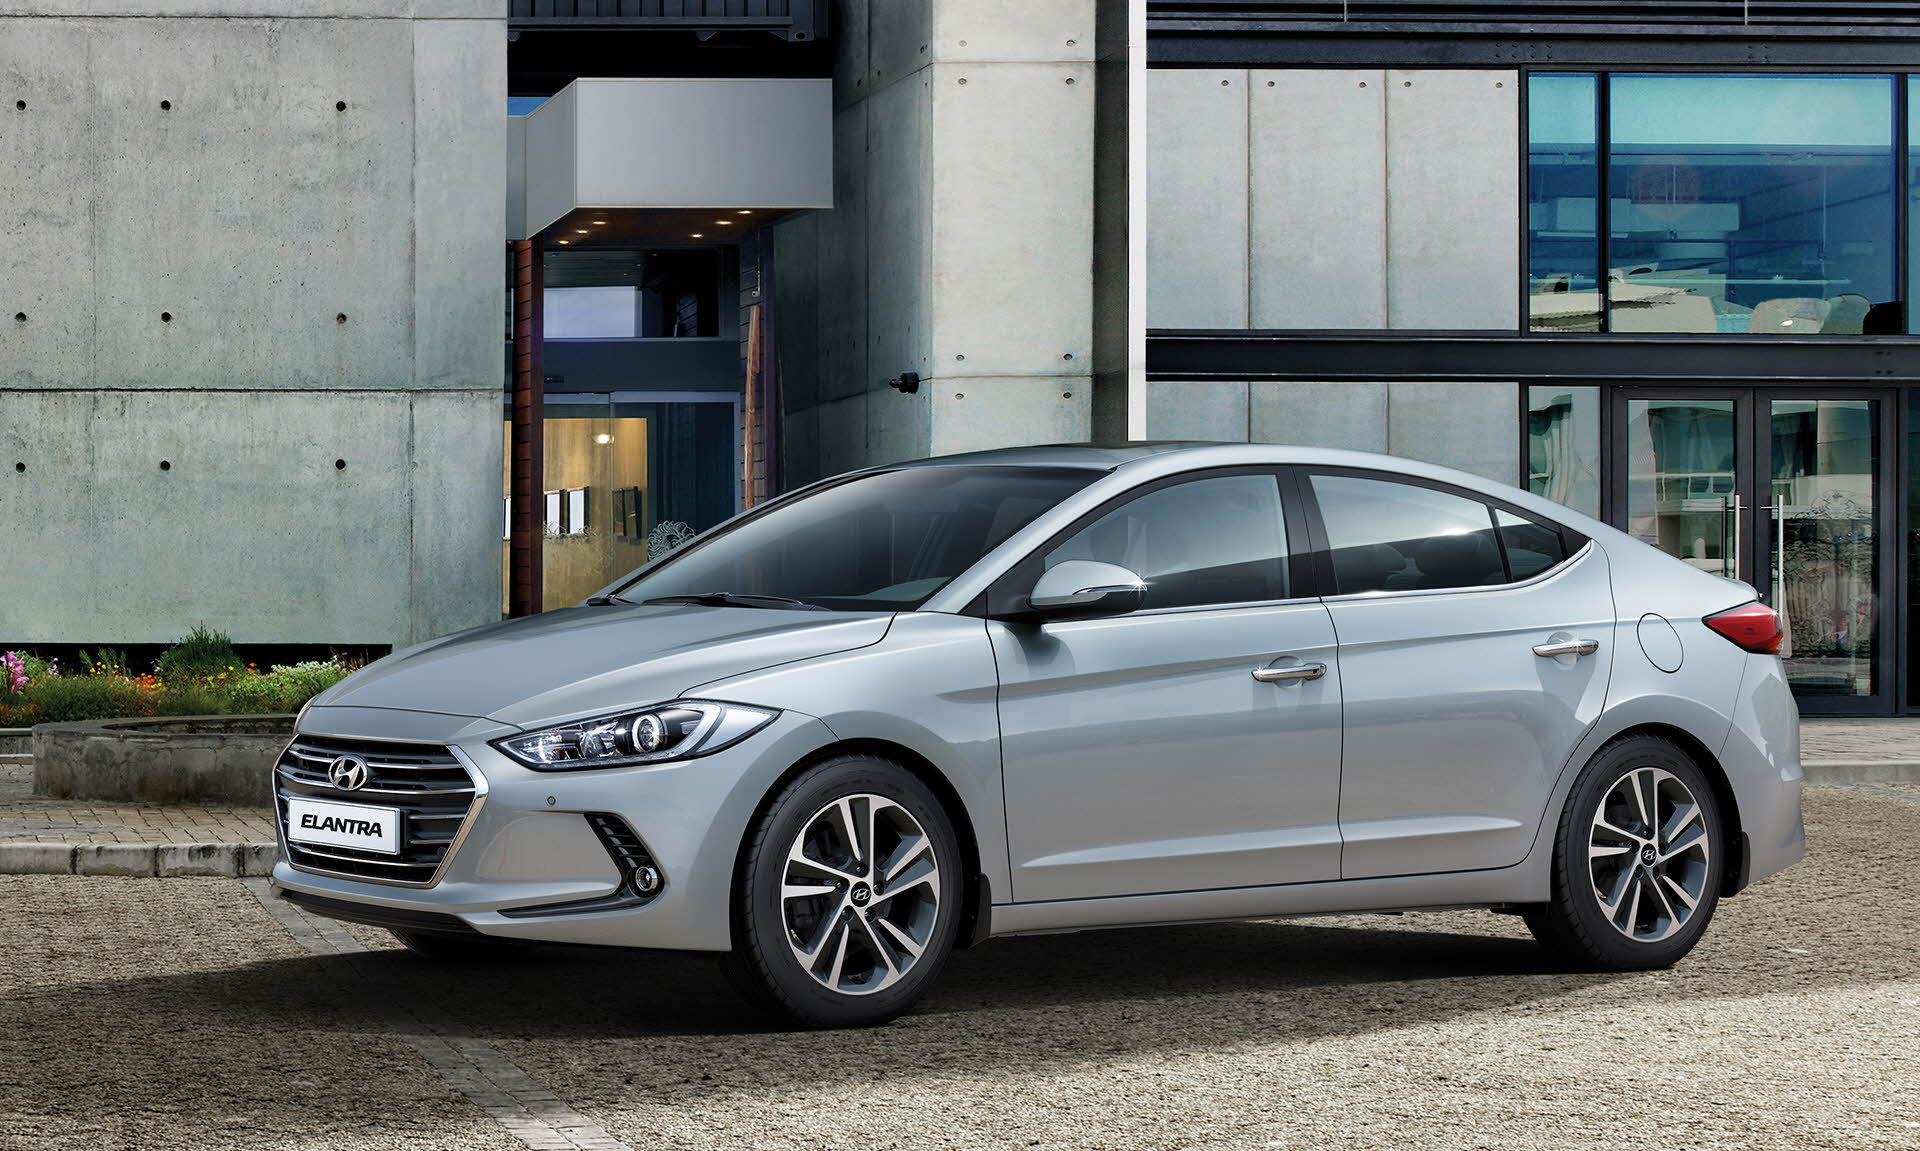 2017 Hyundai Elantra launched in India - starts from Rs. 12.99 lakhs